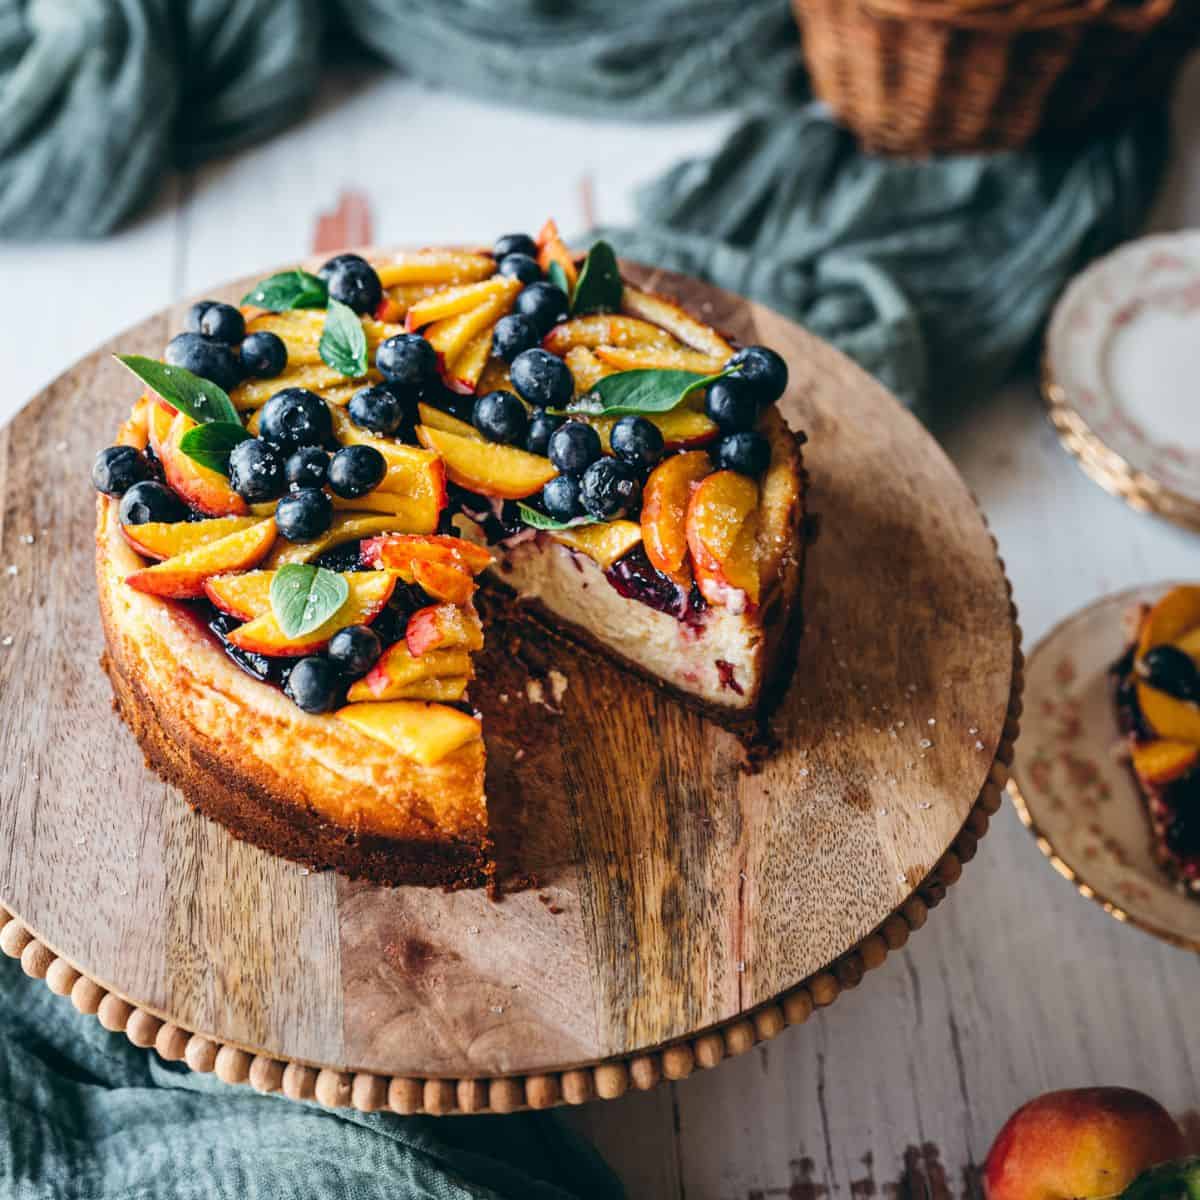 close up image at side angle showing blueberry peach cheesecake on a rustic wooden cake stand covered in fresh blueberries and sliced peach wedge with mint leaves for garnish